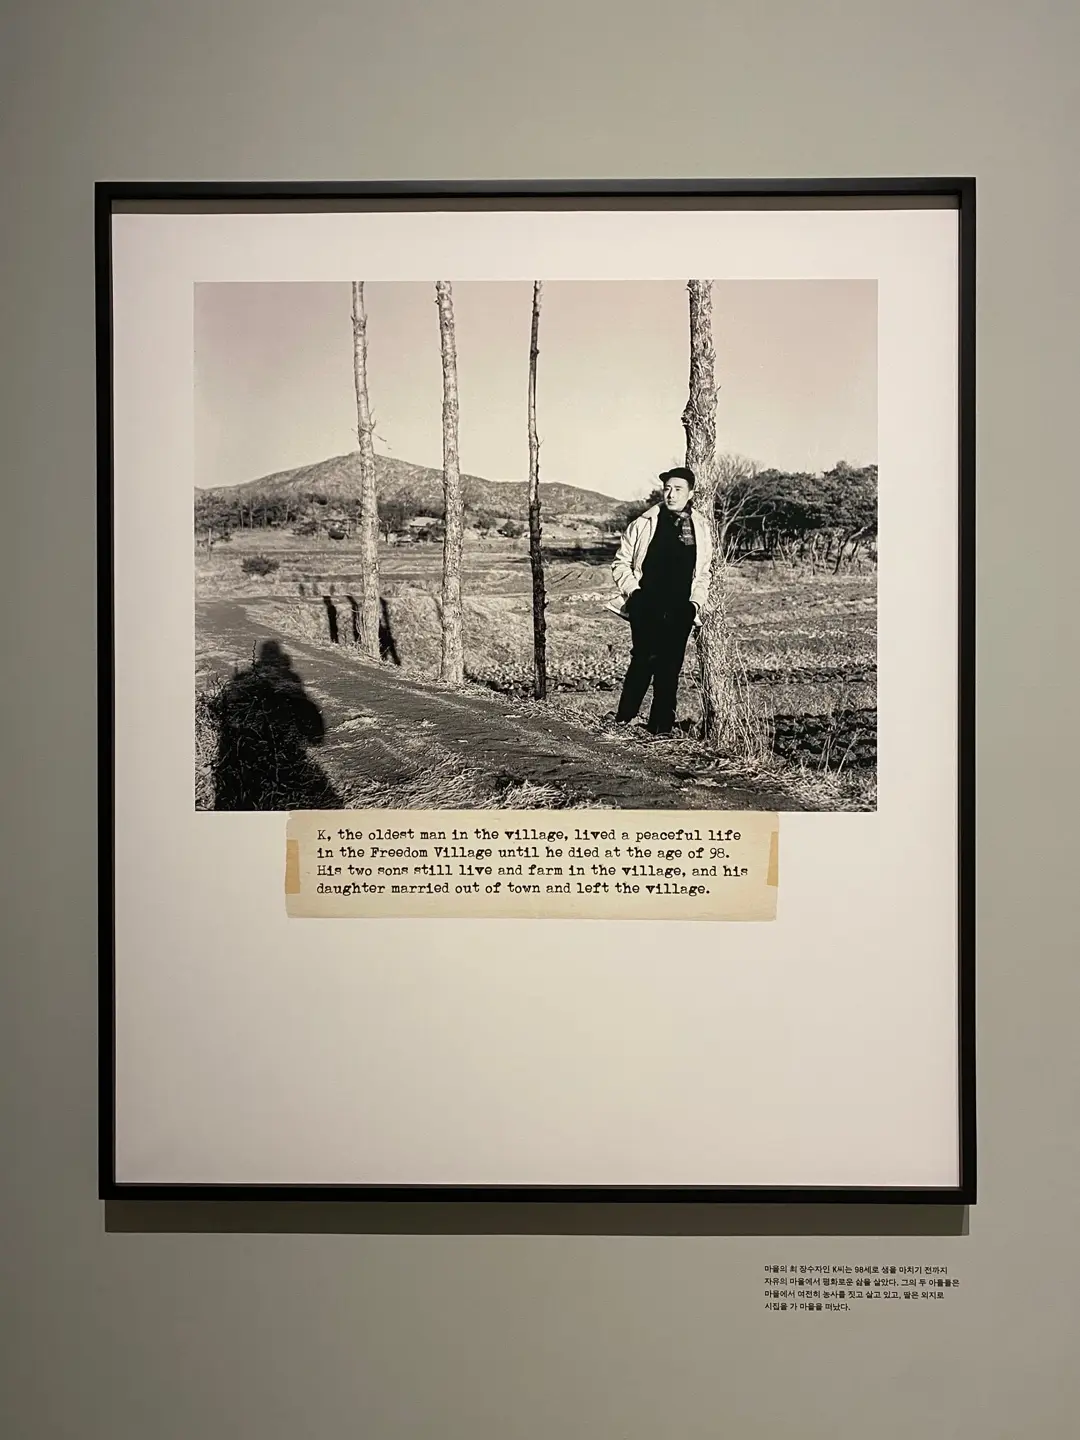 A framed digital print of a vintage photograph featuring an individual leaning on a tree in an open field. Typed caption is just below the image.